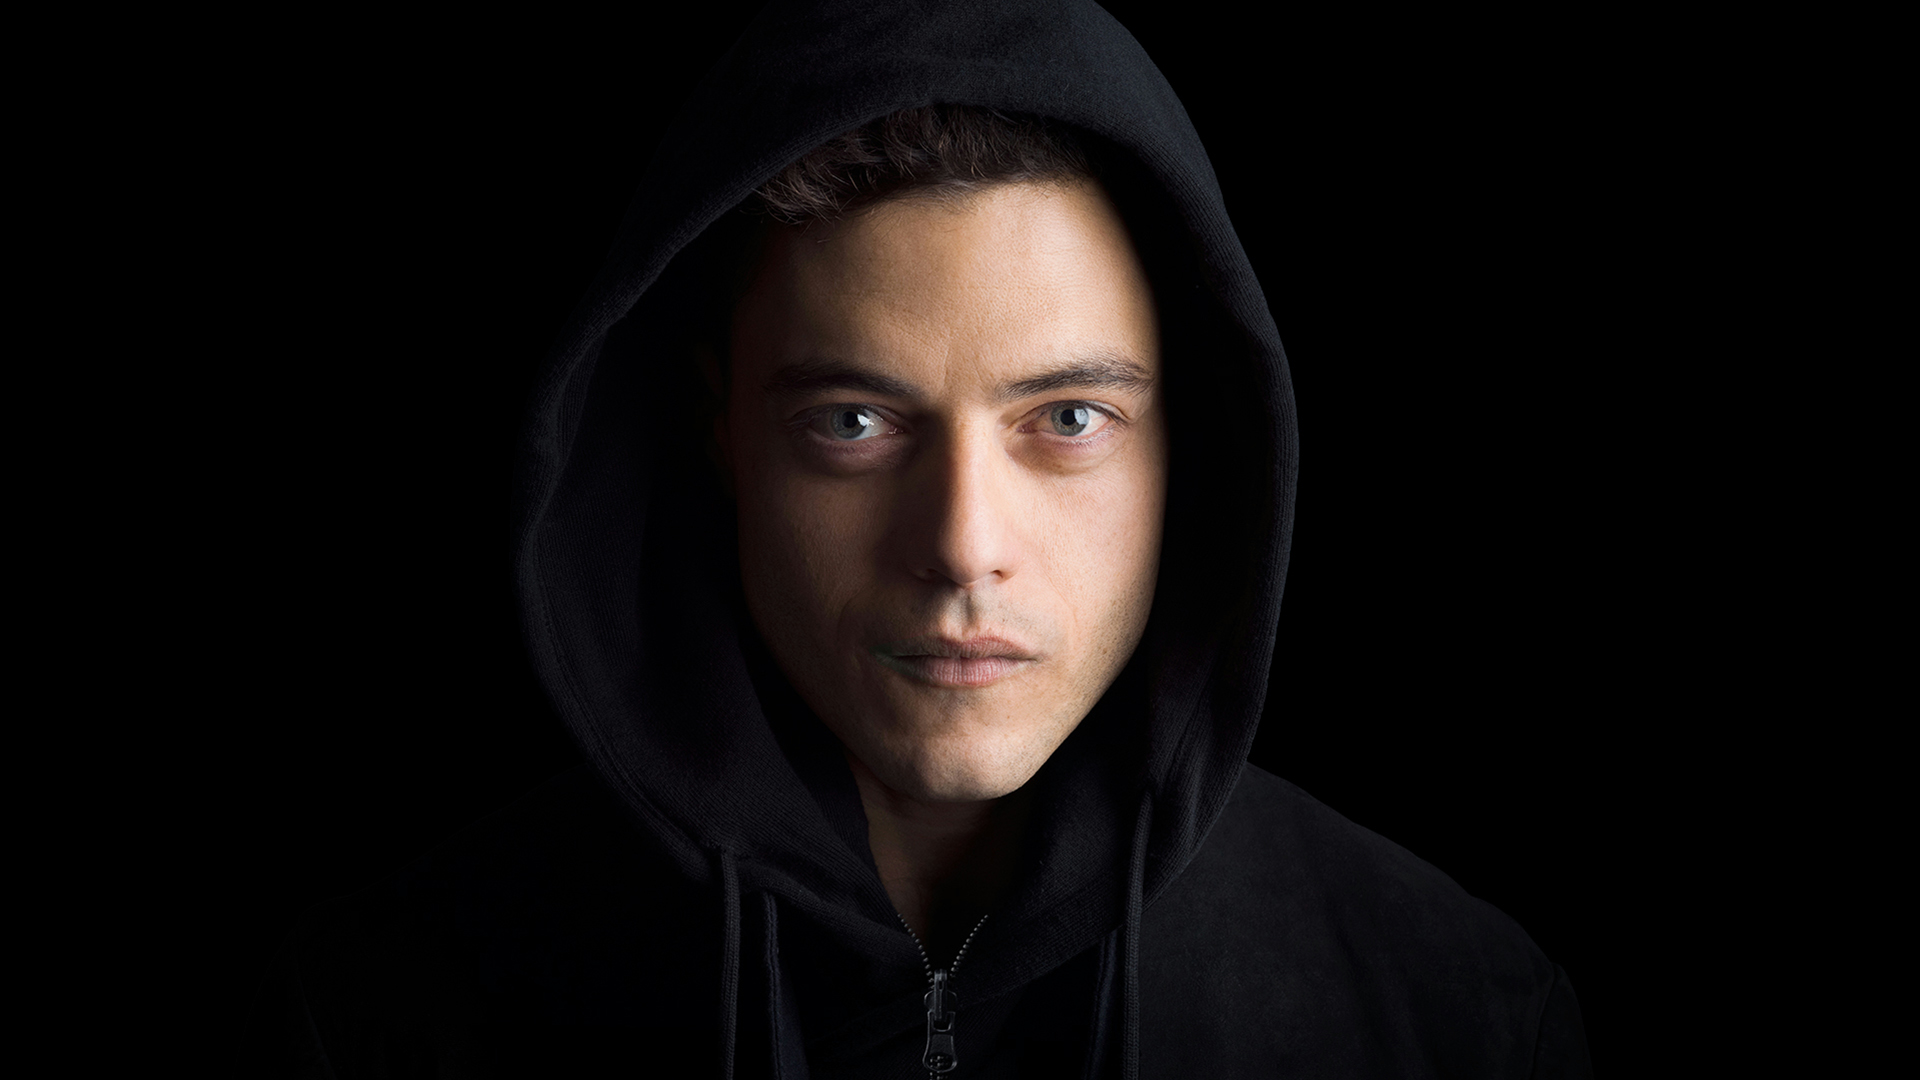 Mr. Robot: Behind the Mask (2017) Stream and Watch Online